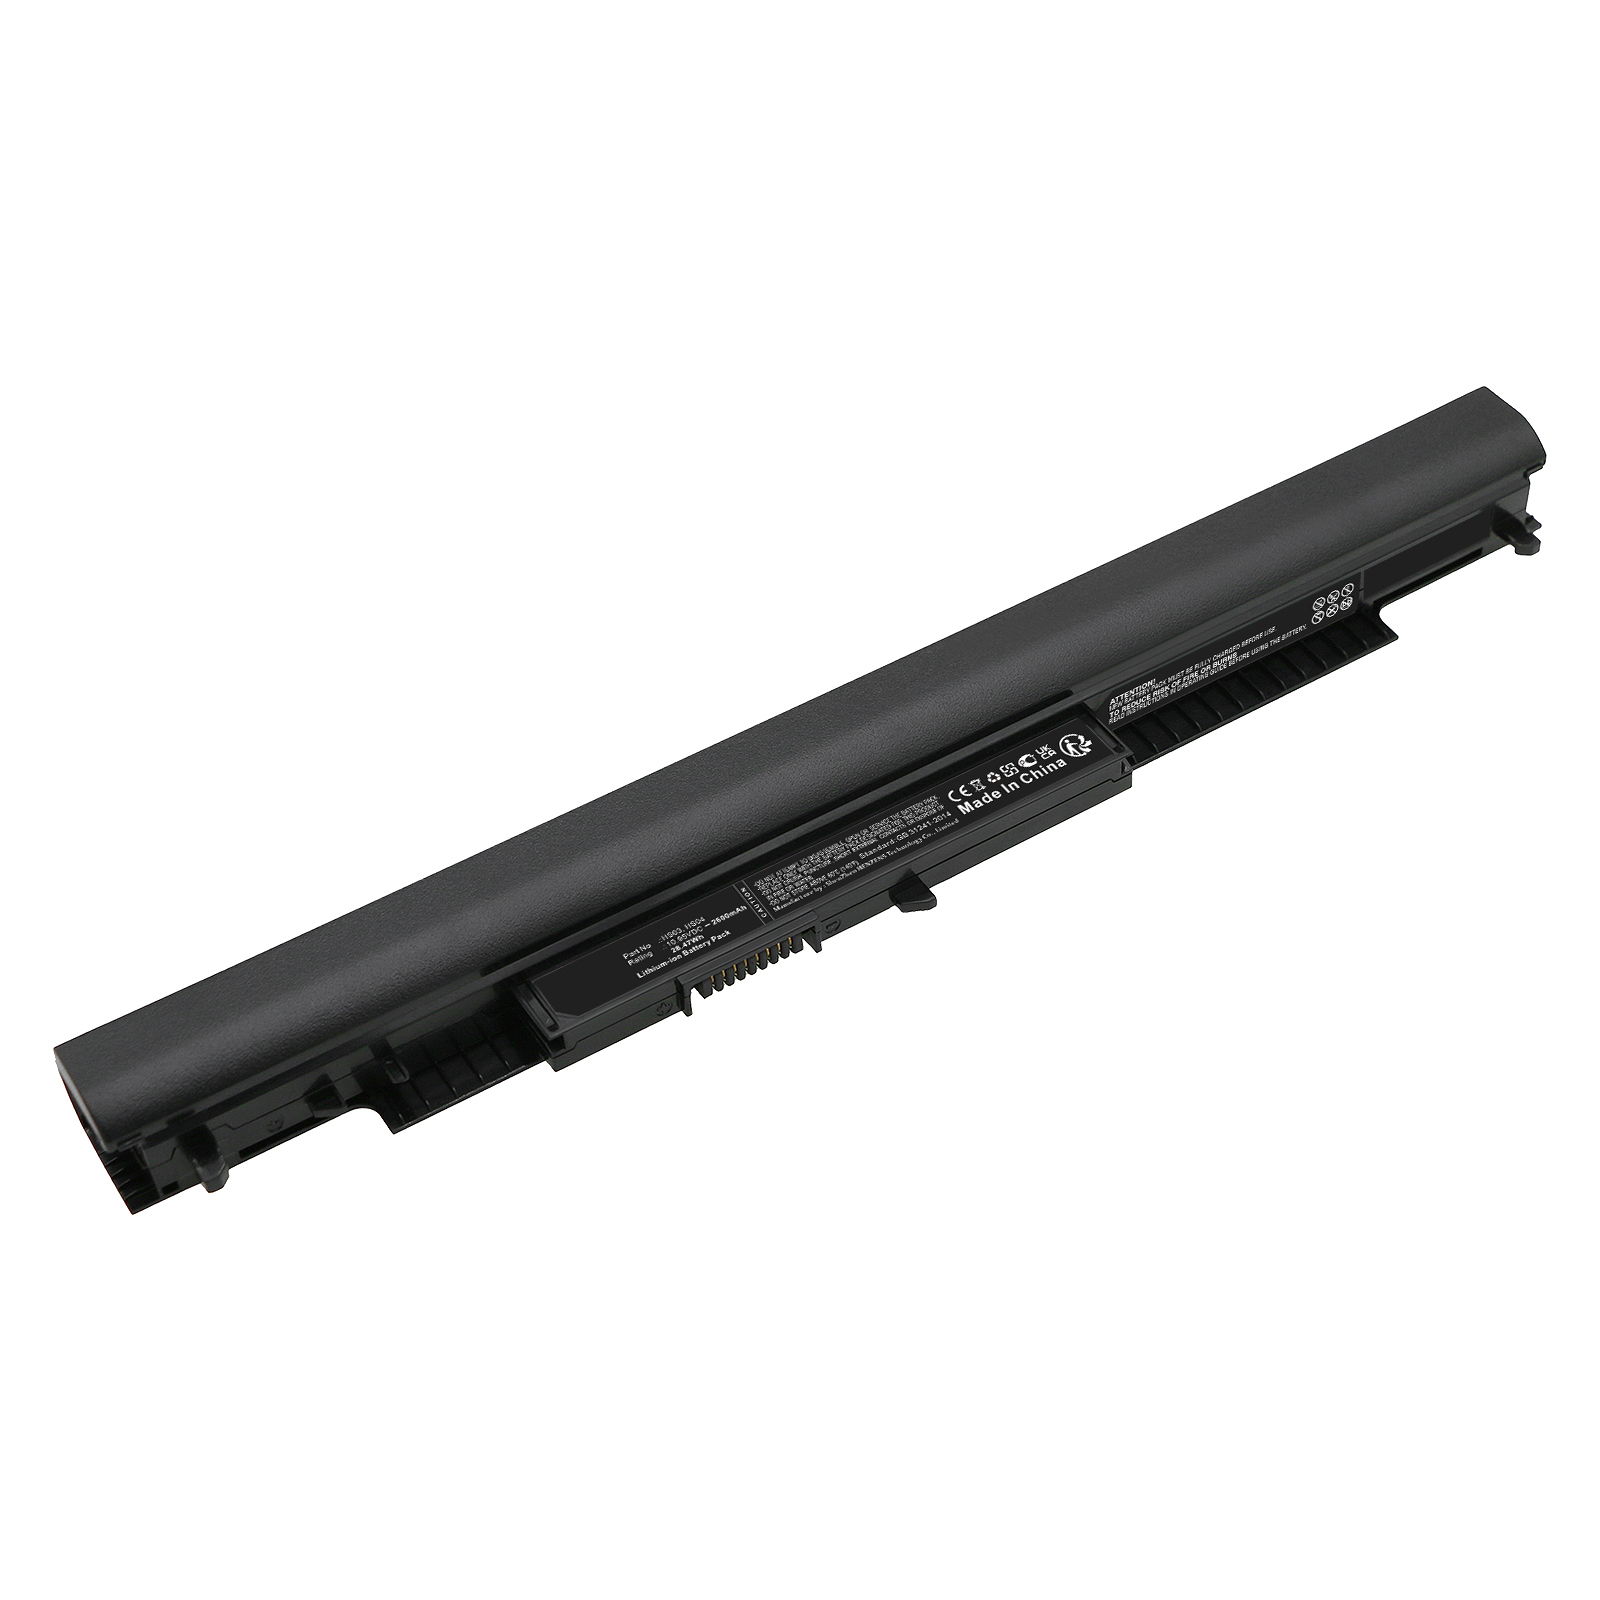 Synergy Digital Laptop Battery, Compatible with HP 807611-121 Laptop Battery (Li-ion, 10.95V, 2600mAh)